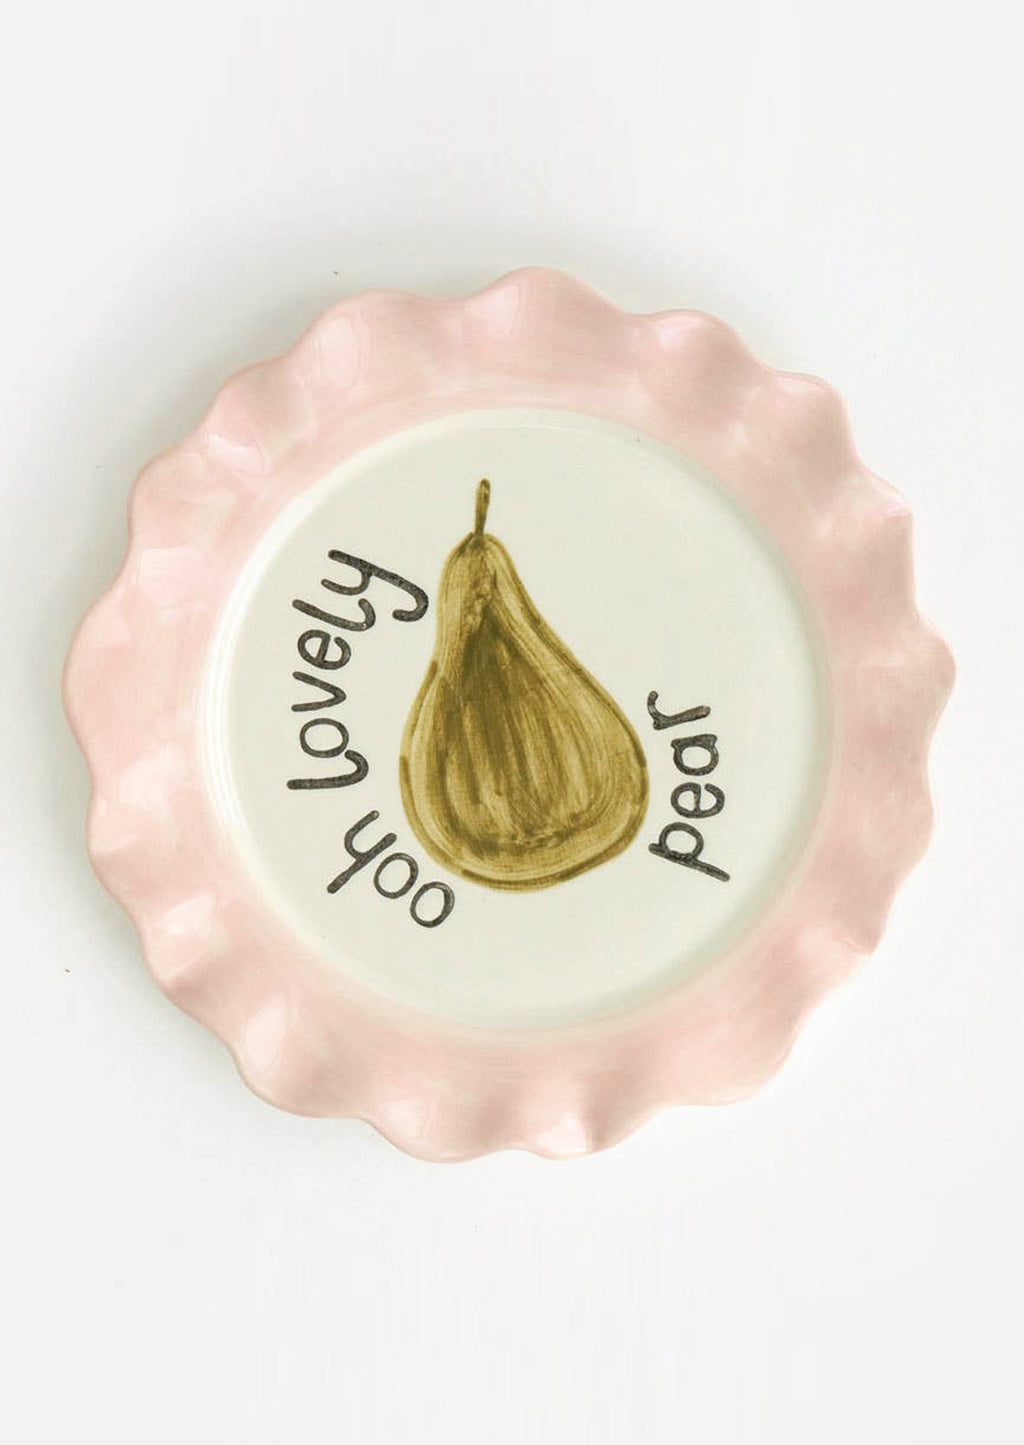 Lovely Pear: A printed ceramic plate with pink colored rim and pear graphic, text reads "Ooh lovely pear".